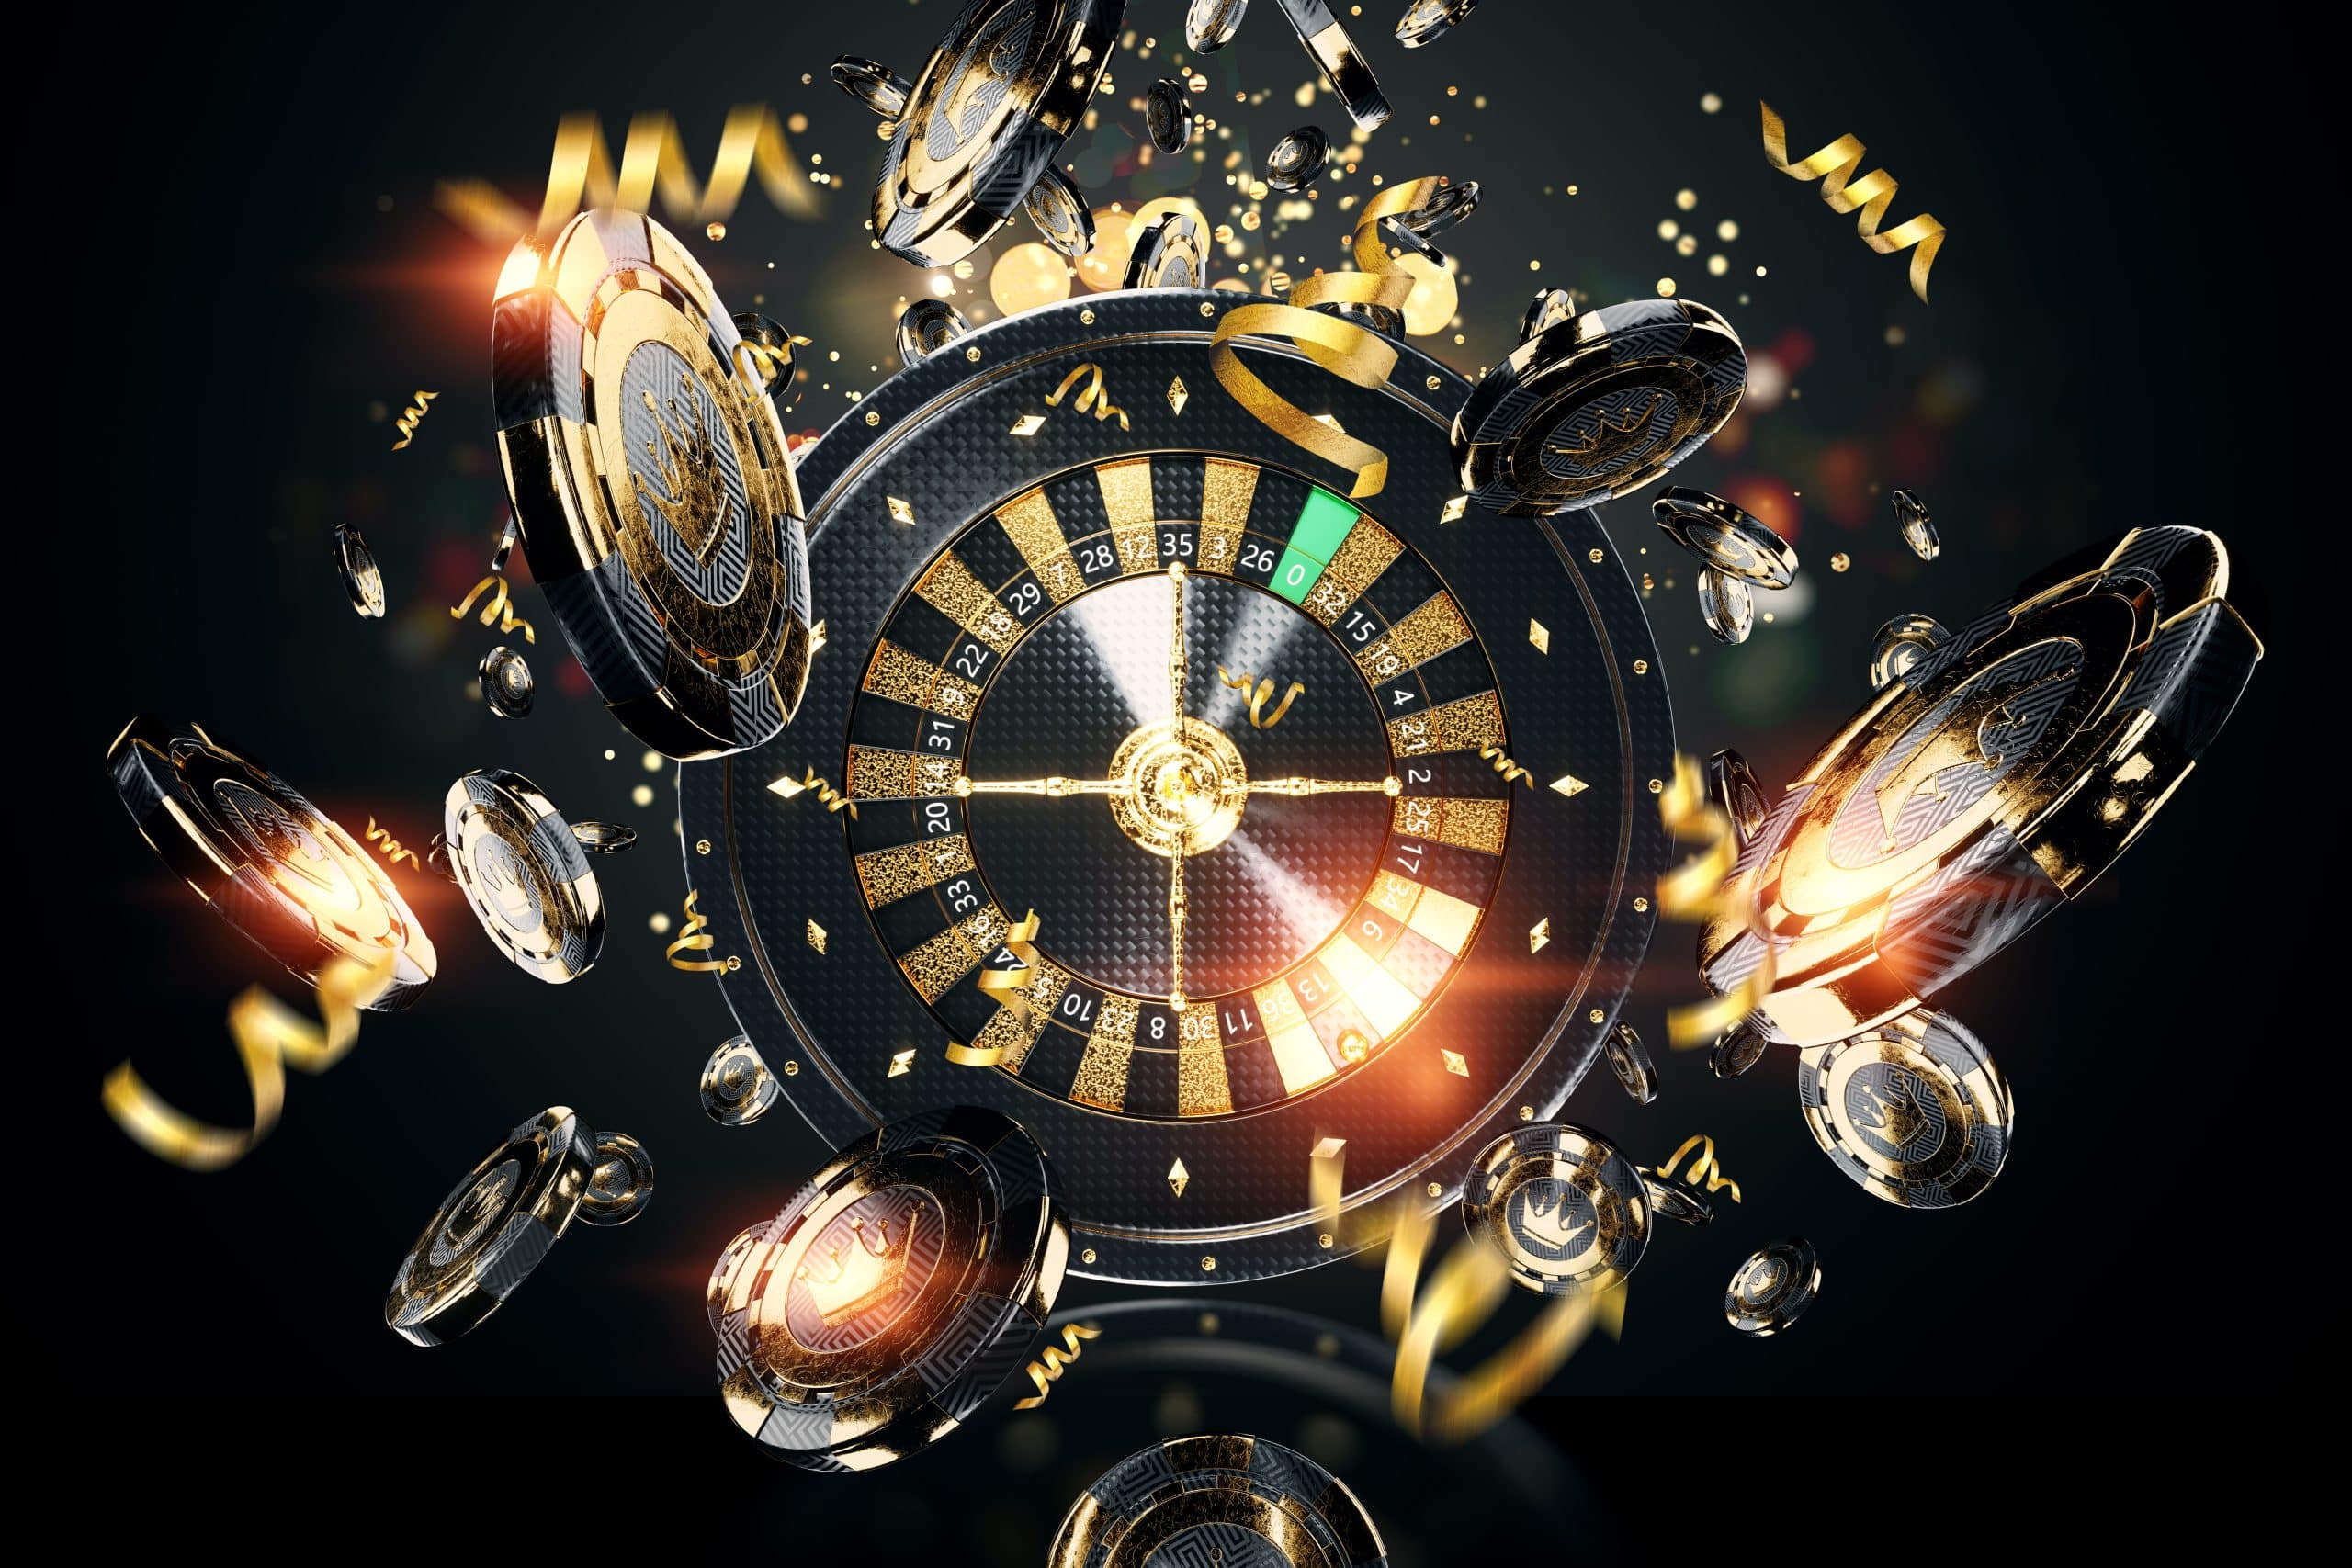 creative casino template background design with black gold playing chips roulette concept roulette gambling entertainment hat site 3d illustration 3d render scaled